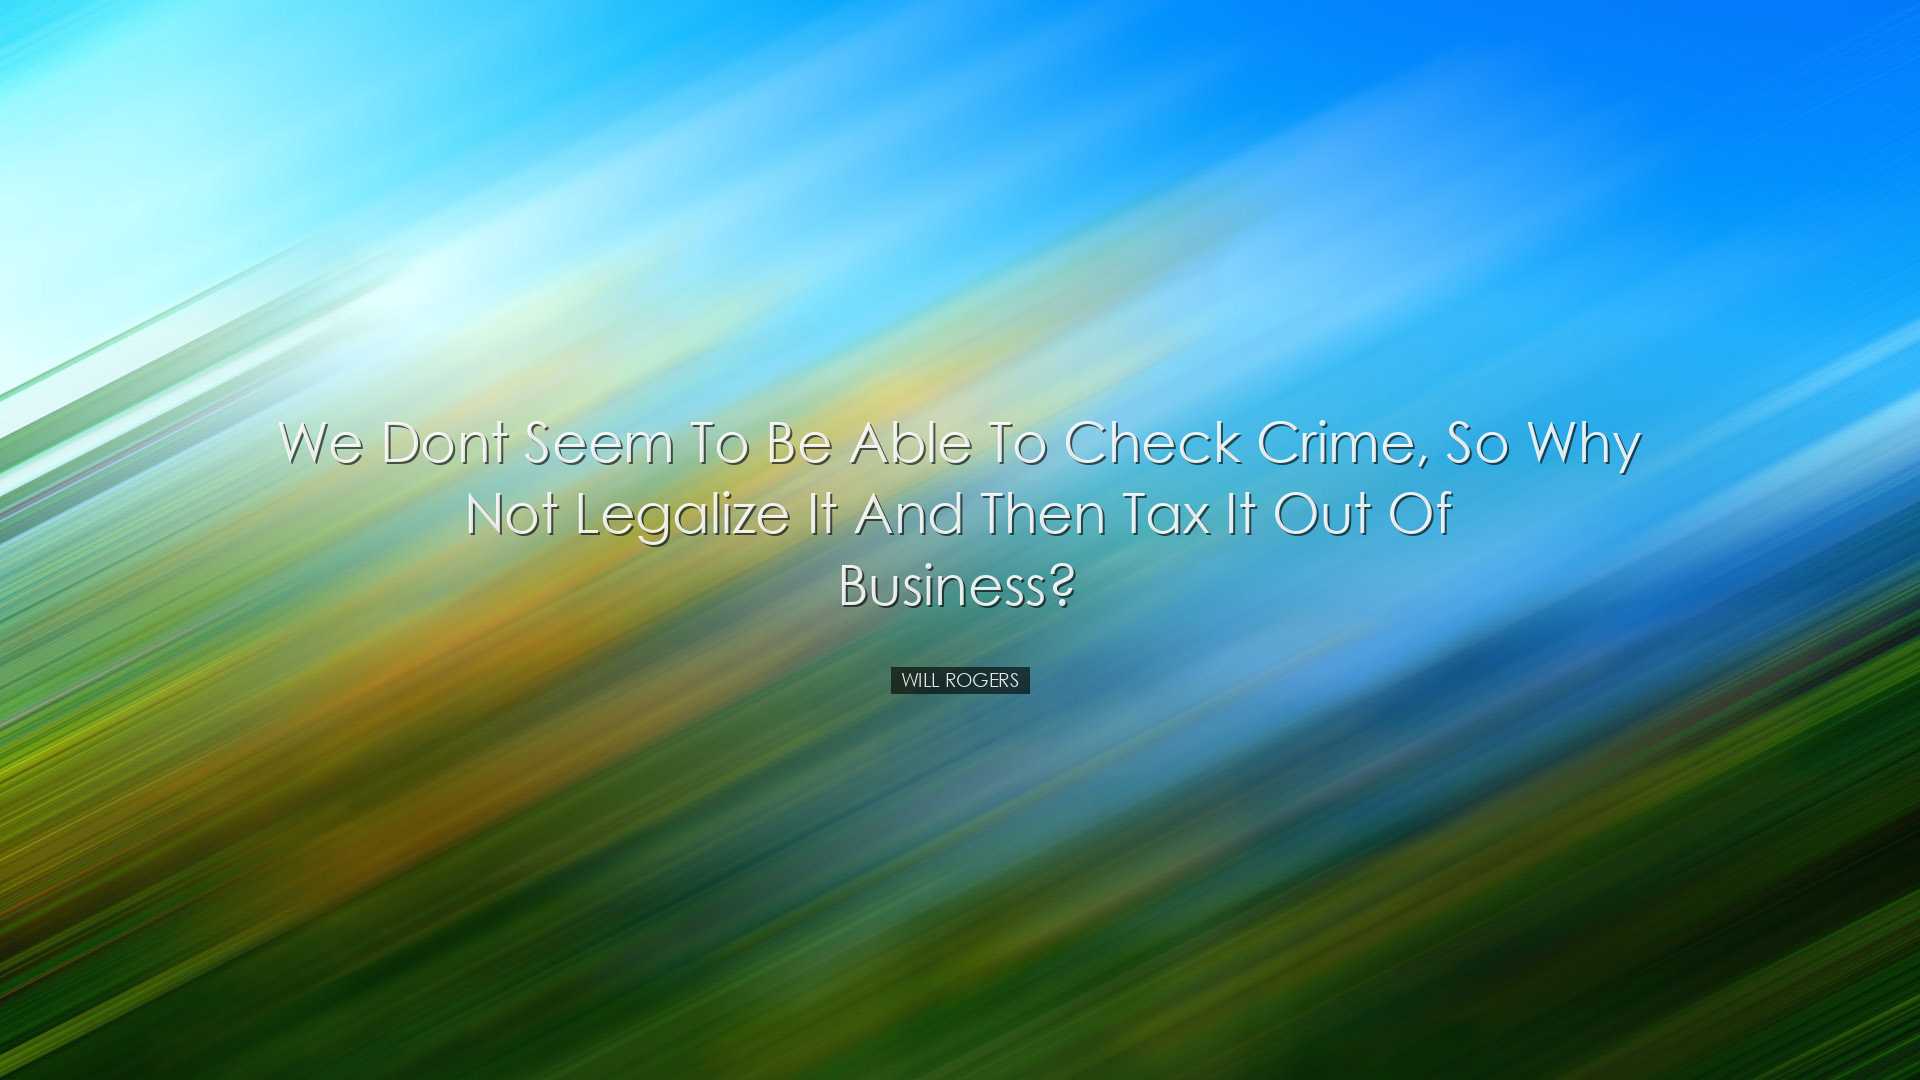 We dont seem to be able to check crime, so why not legalize it and